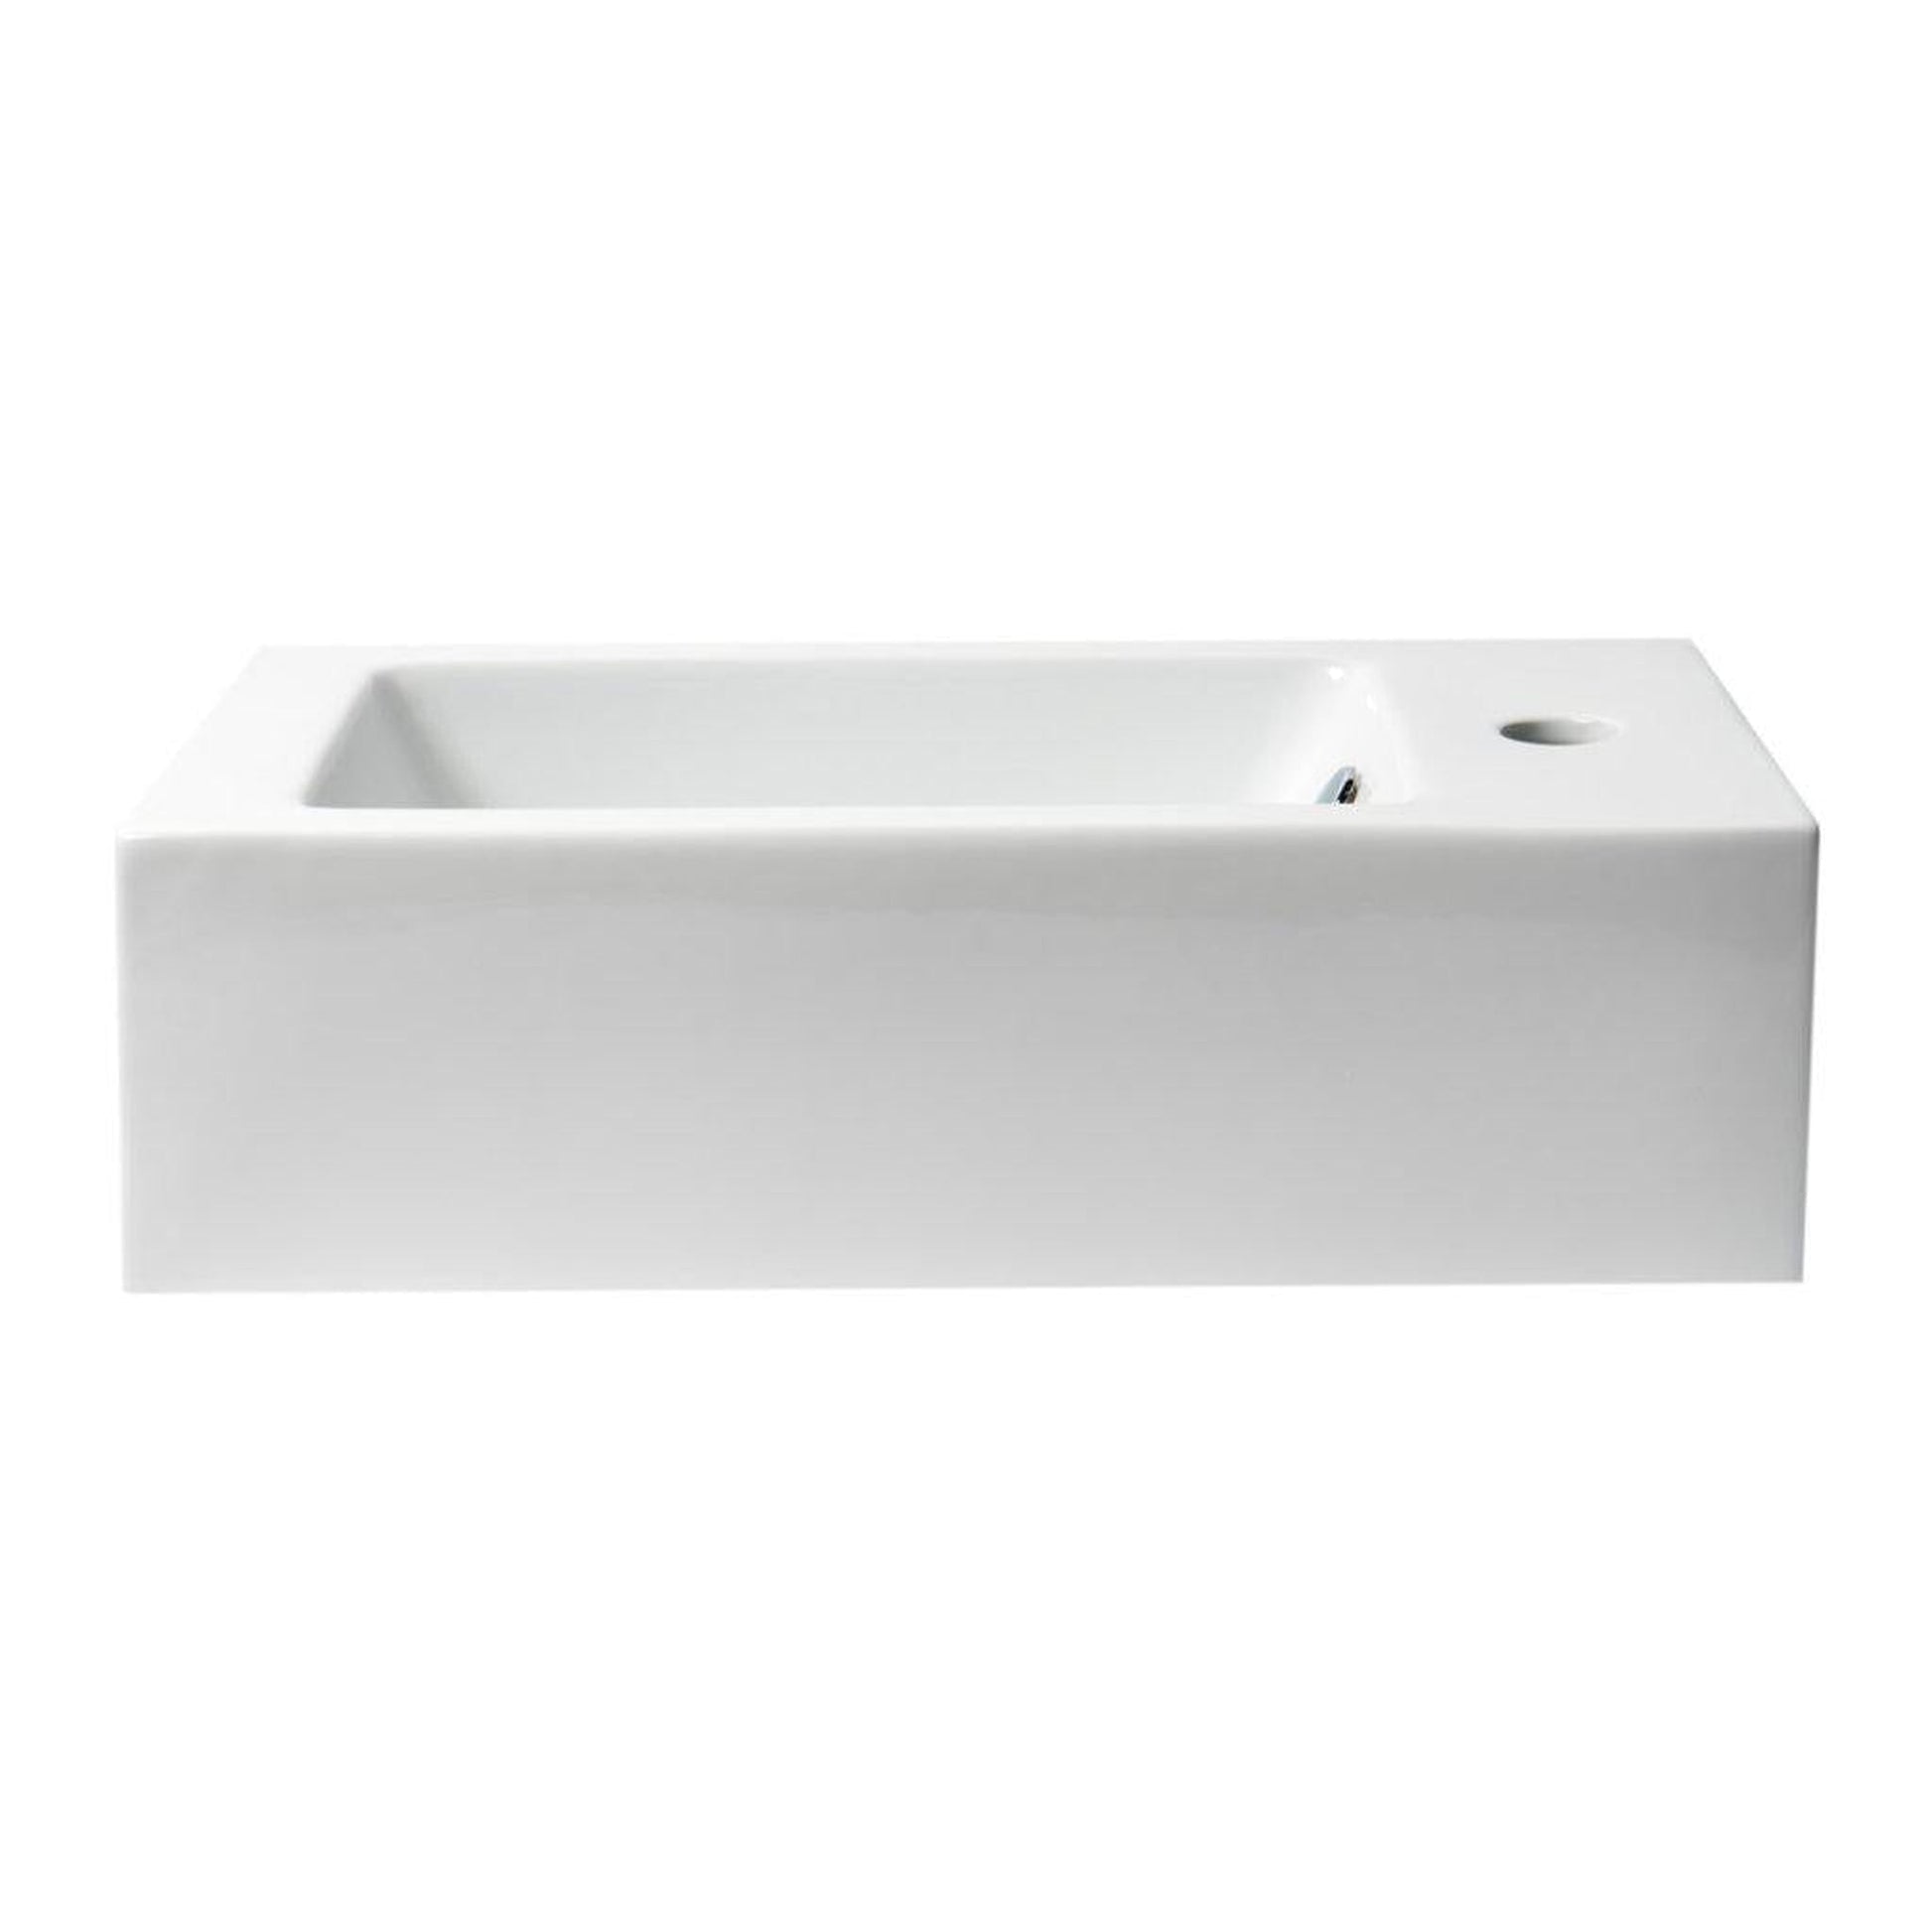 ALFI Brand ABC116 20" White Wall-Mounted Rectangle Ceramic Sink With Single Faucet Hole and Overflow